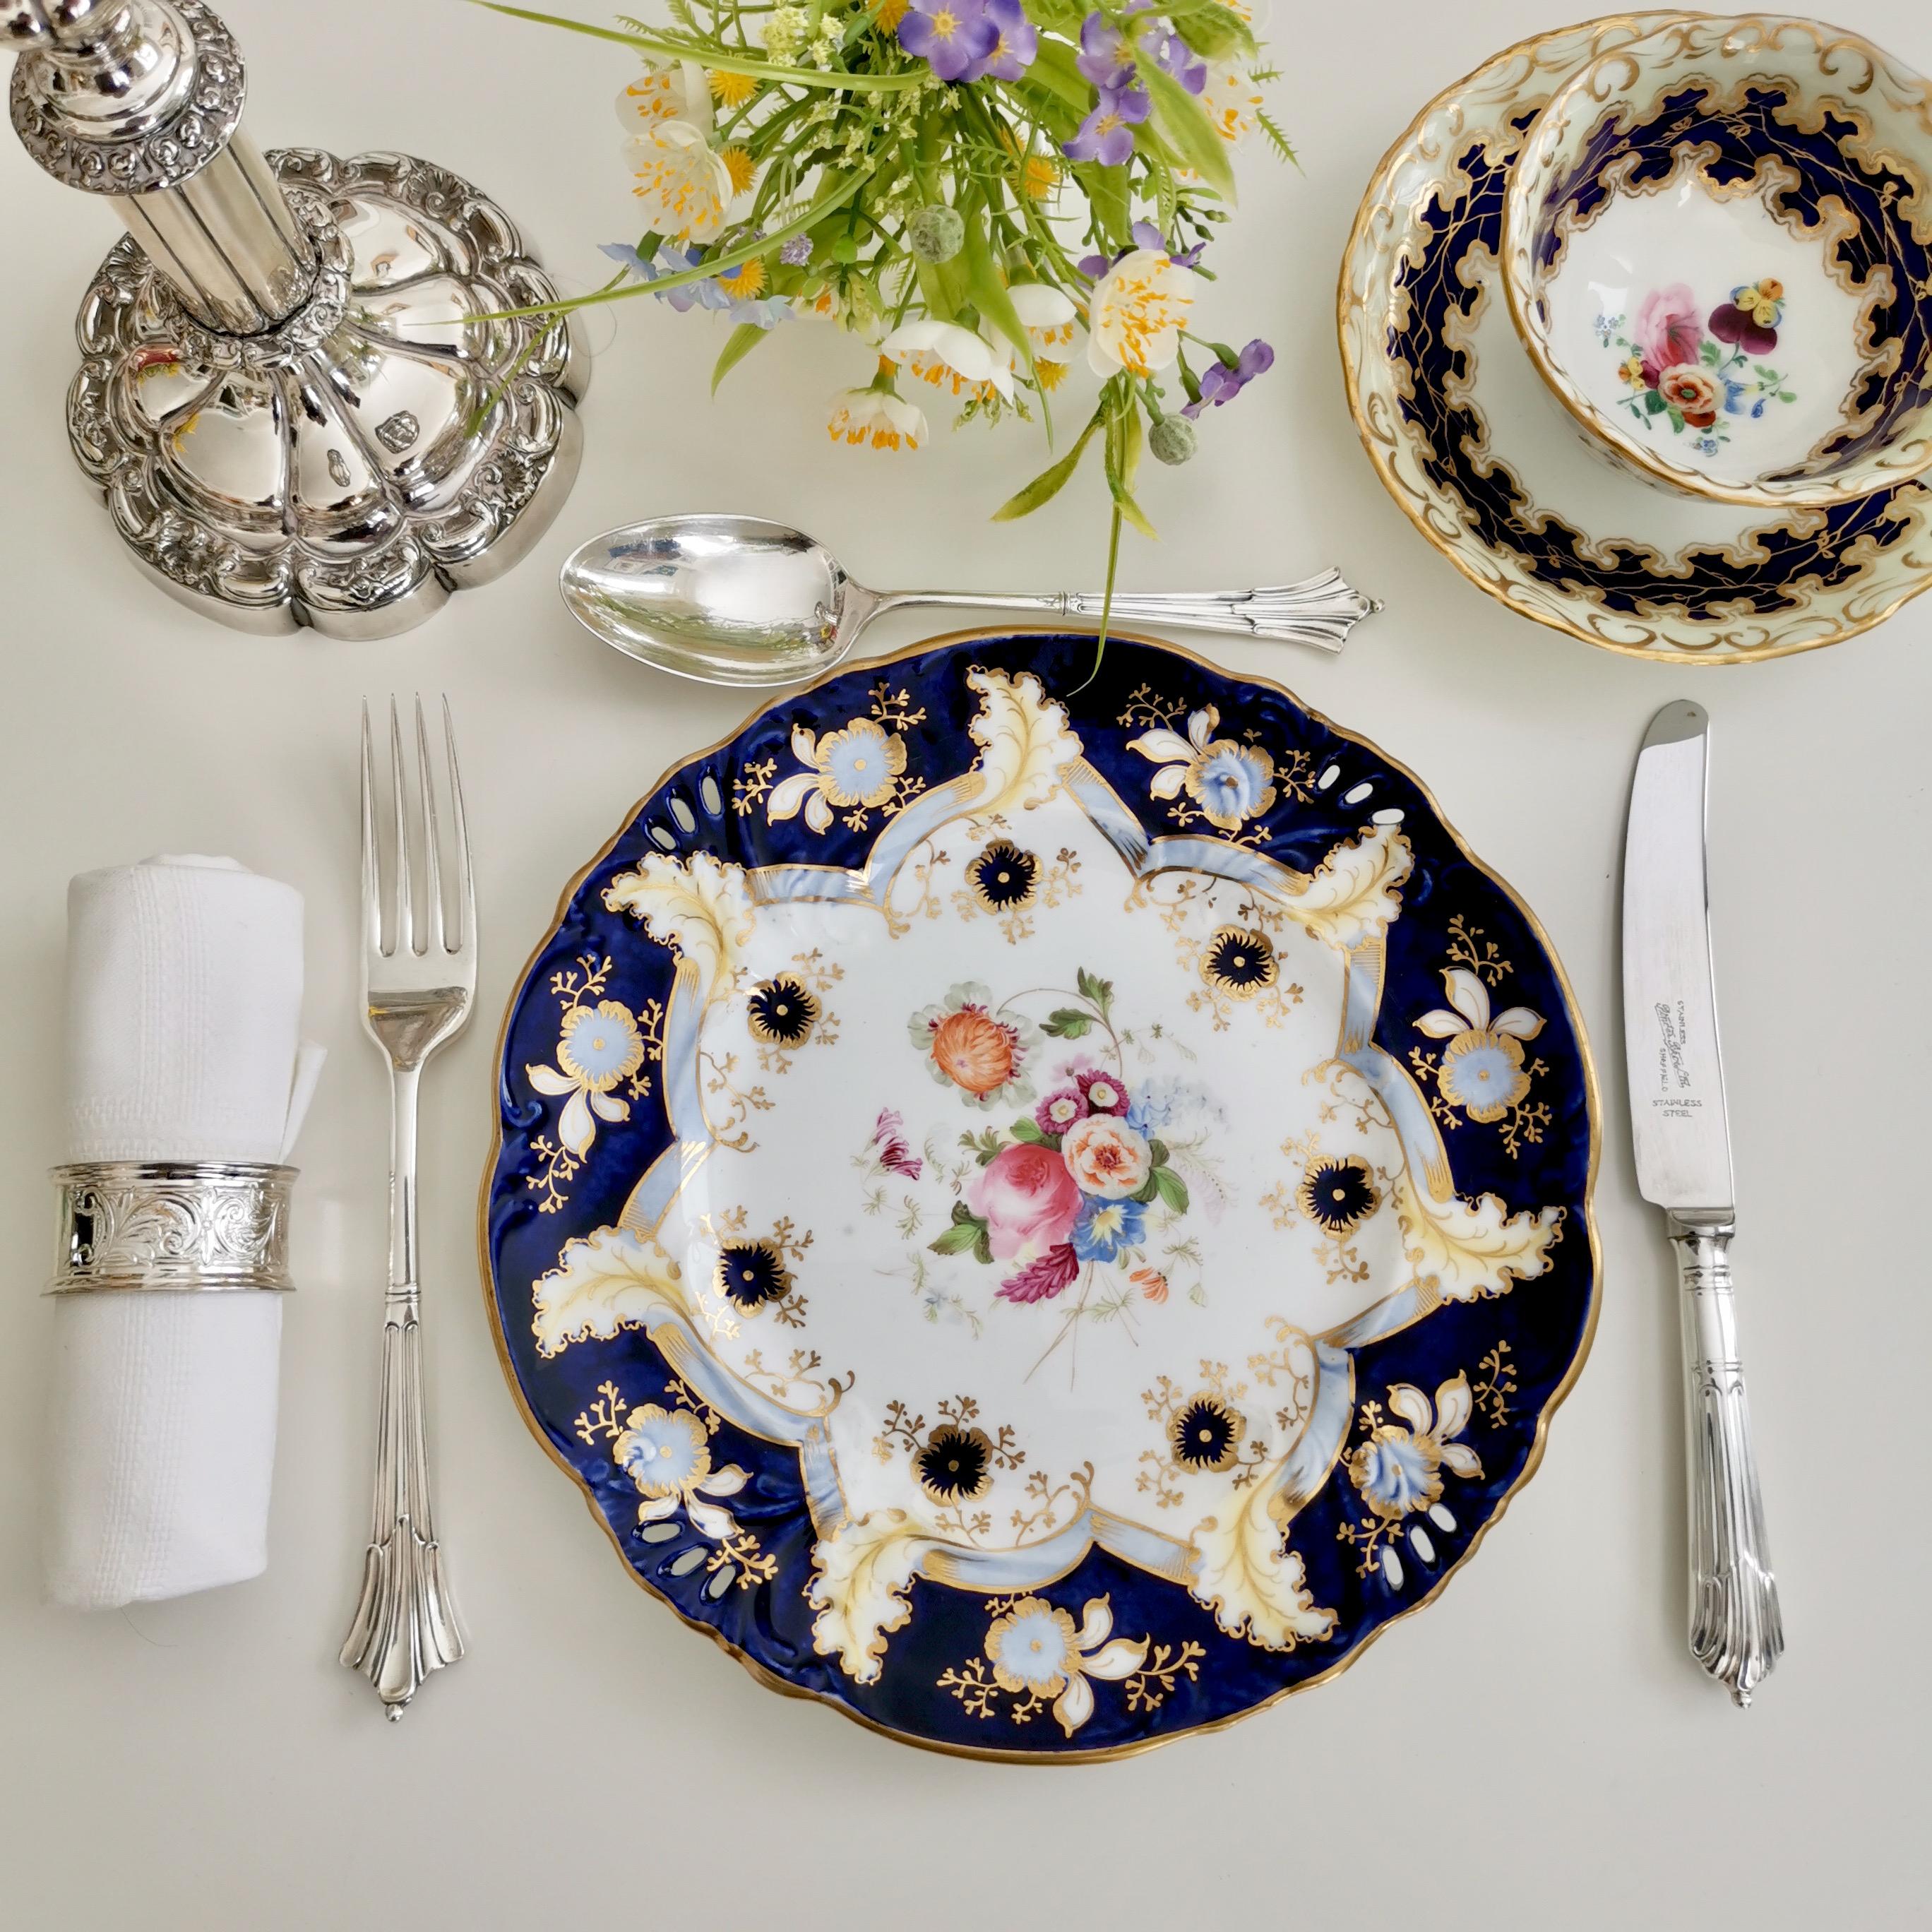 This is a beautiful dessert plate made by Samuel Alcock around the year 1845 during Rococo Revival era. The plate is decorated in cobalt blue, gilt and beautiful flowers, and has a 